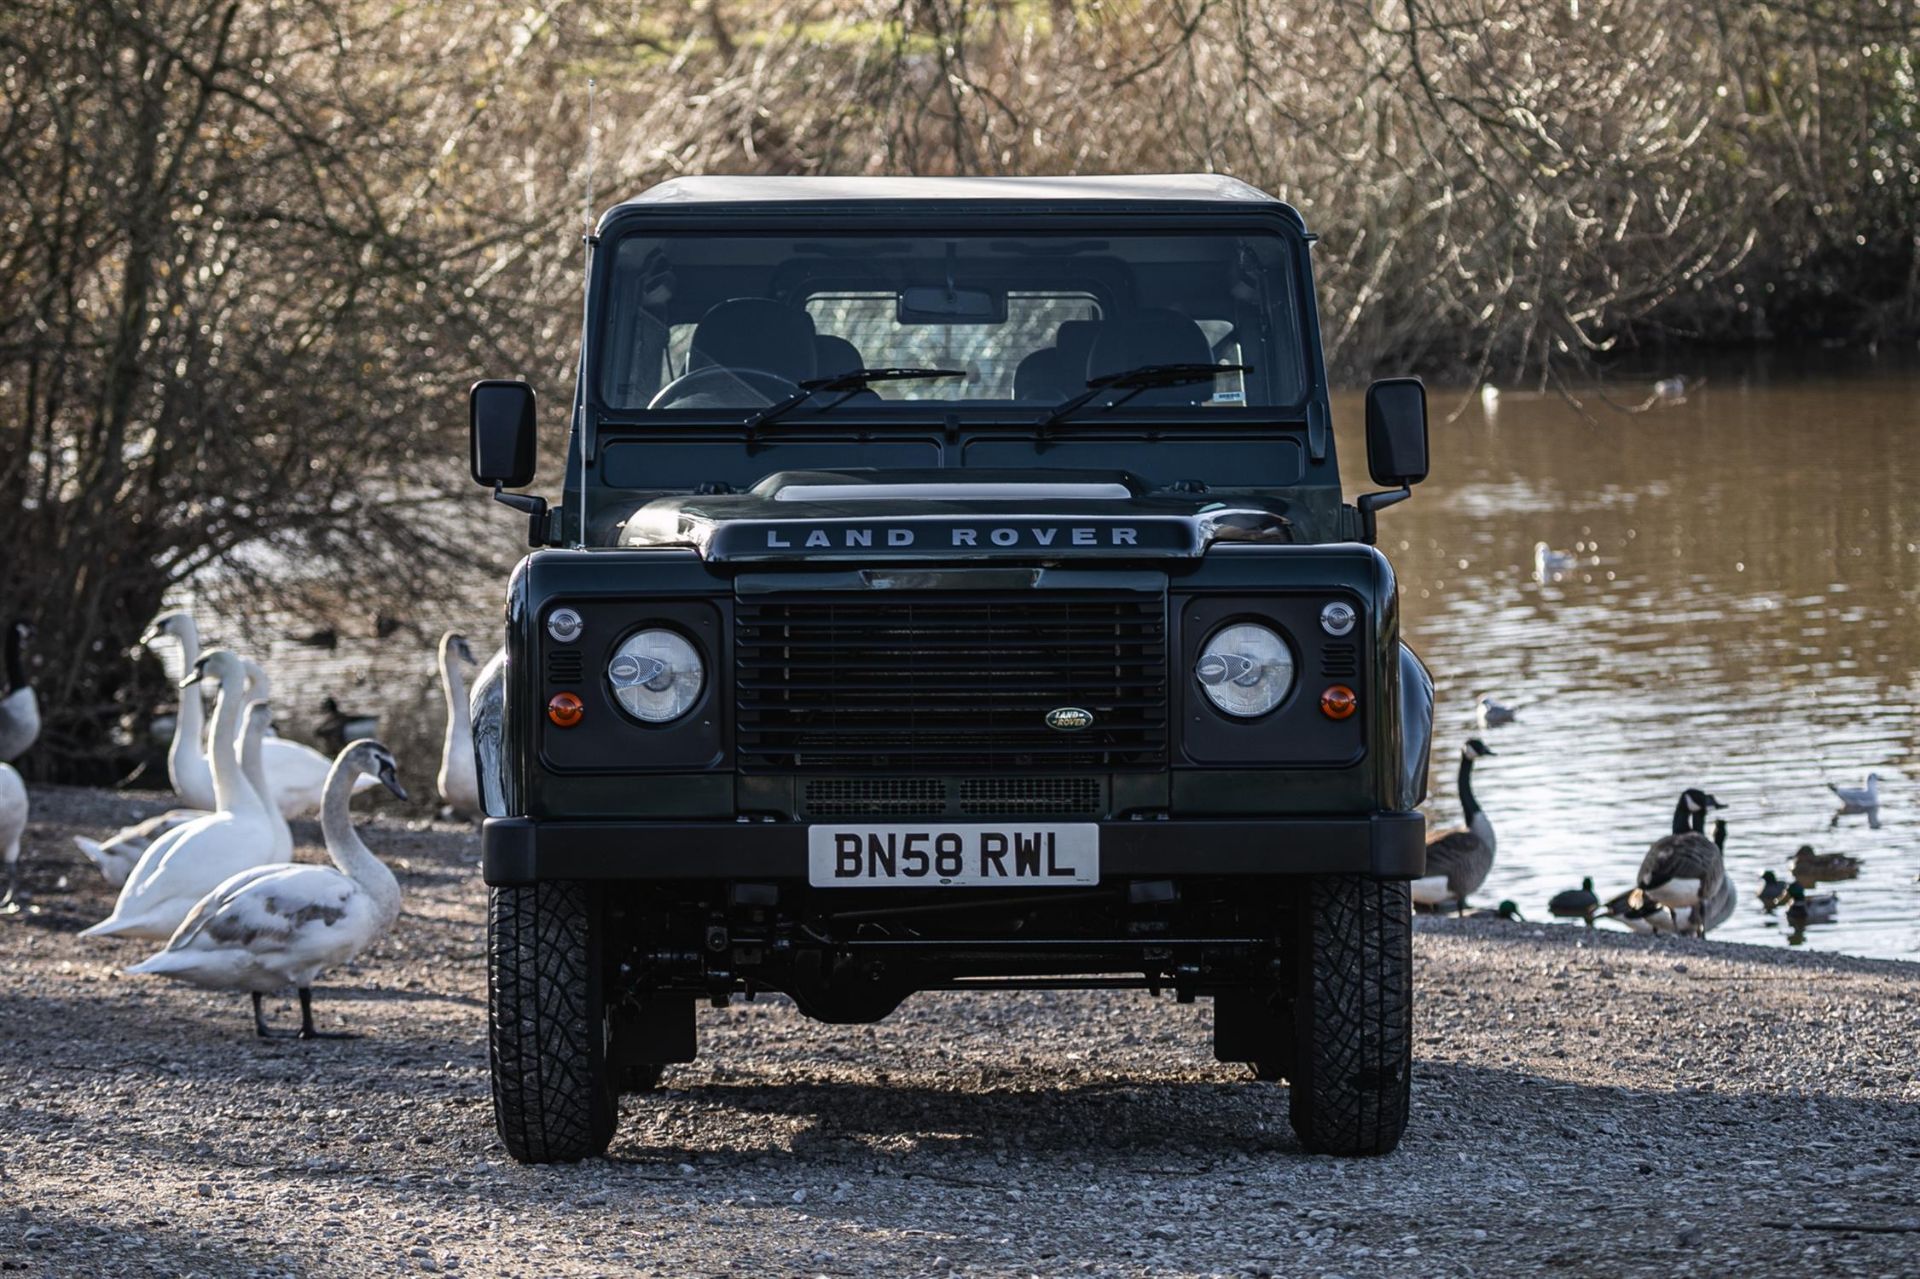 2008 Land Rover Defender 90 TDCi 2.4 County Station Wagon - Image 6 of 10